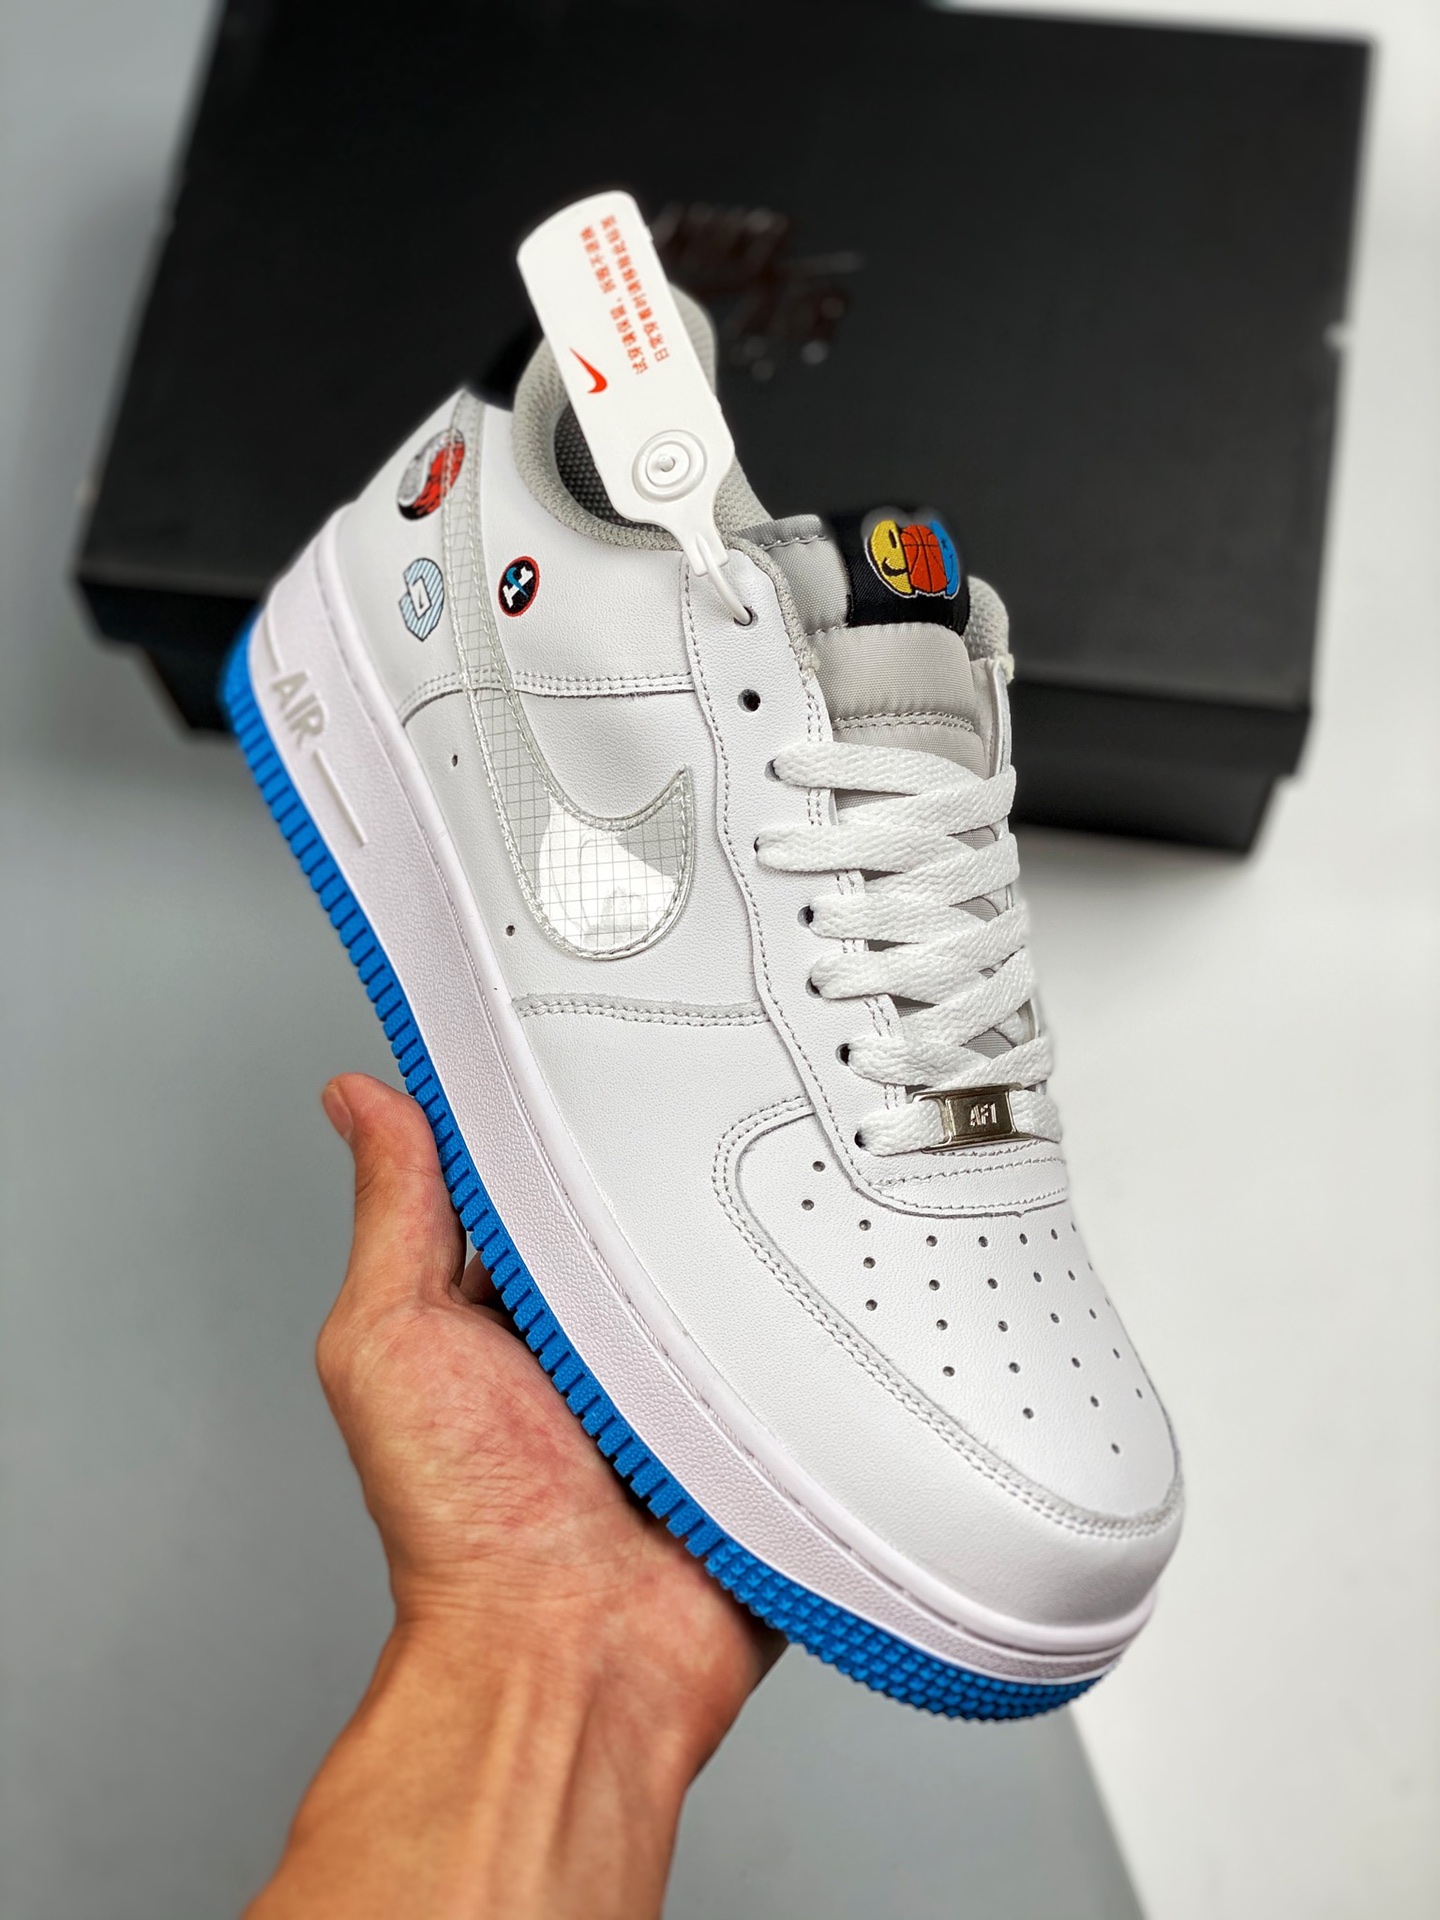 Nike Air AF Force 1 "Sticker" White/Wolf Grey/Black/Multi-Color Shoes